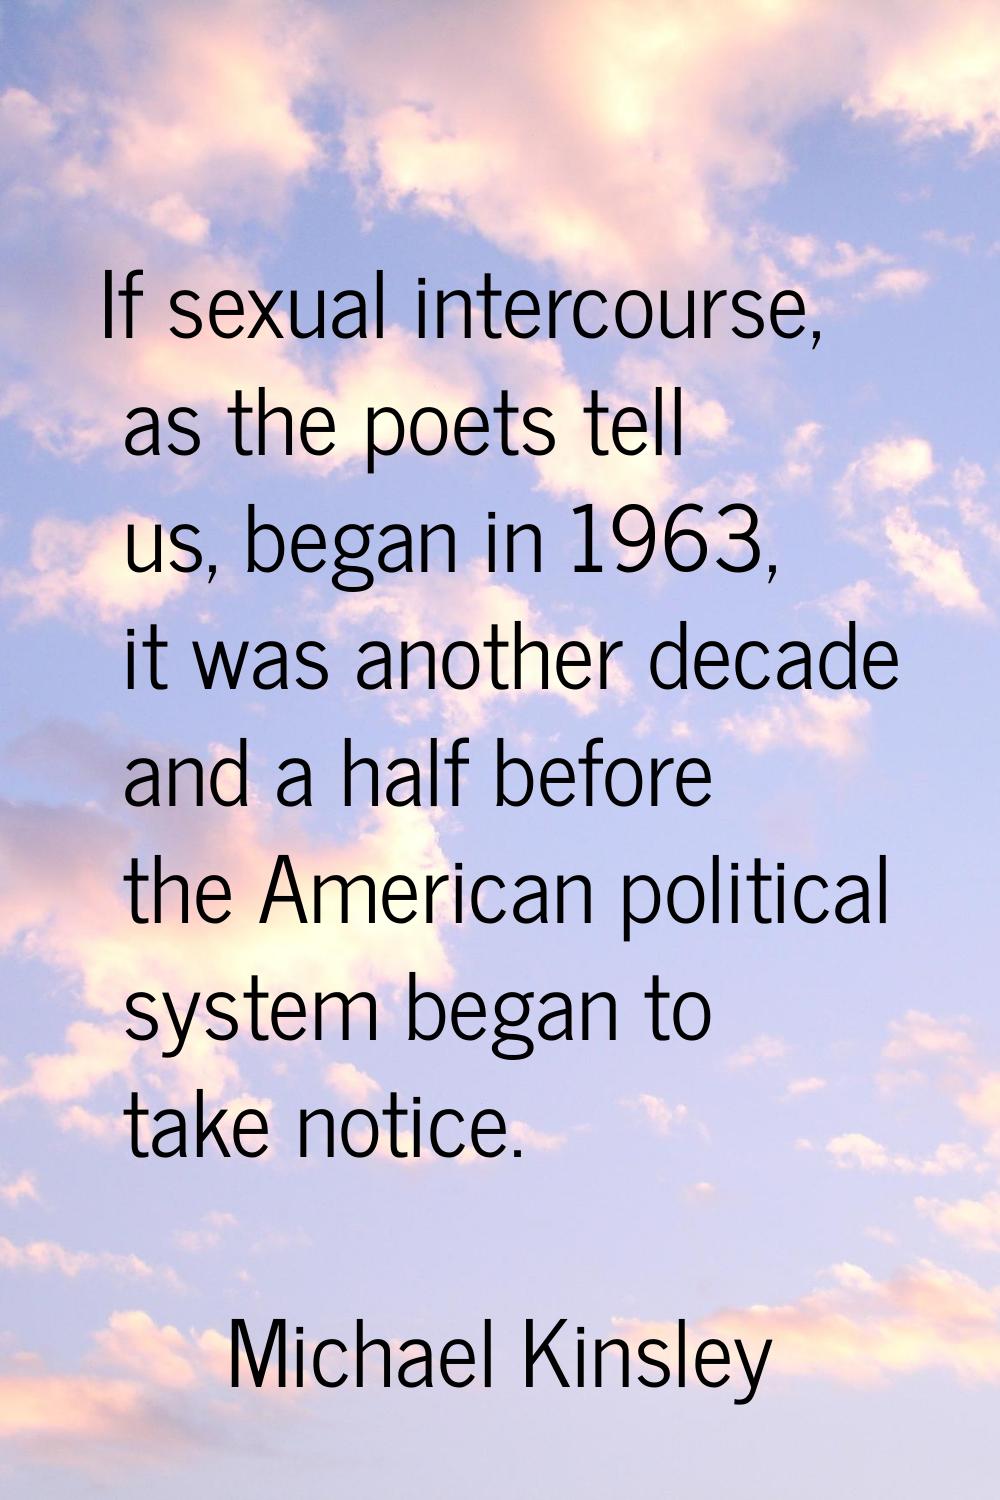 If sexual intercourse, as the poets tell us, began in 1963, it was another decade and a half before